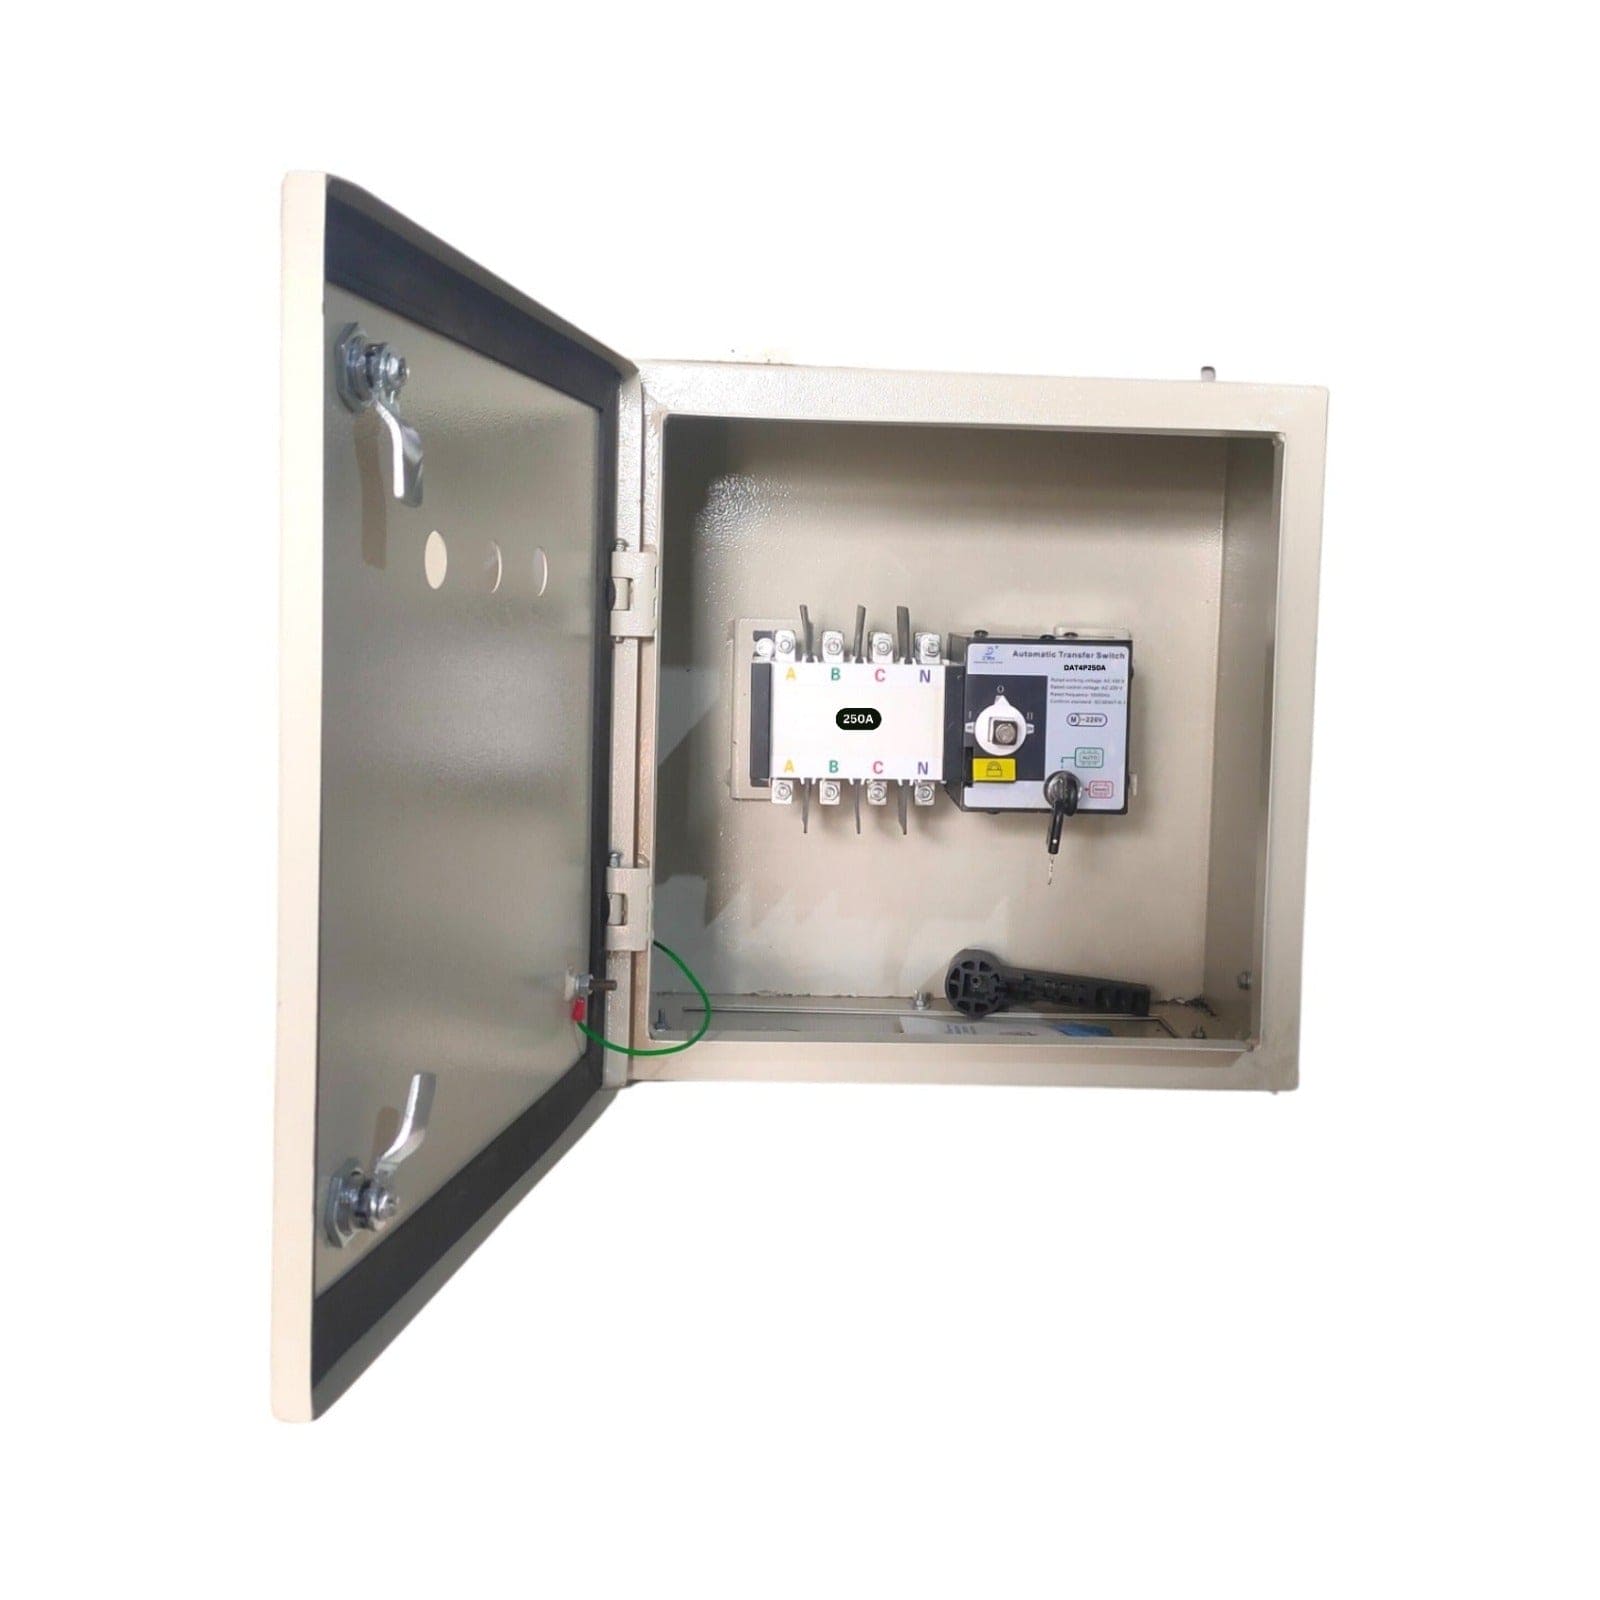 DMAK Switchgear 250A 4P Automatic Transfer Switch with Enclosure (DAT4P250)